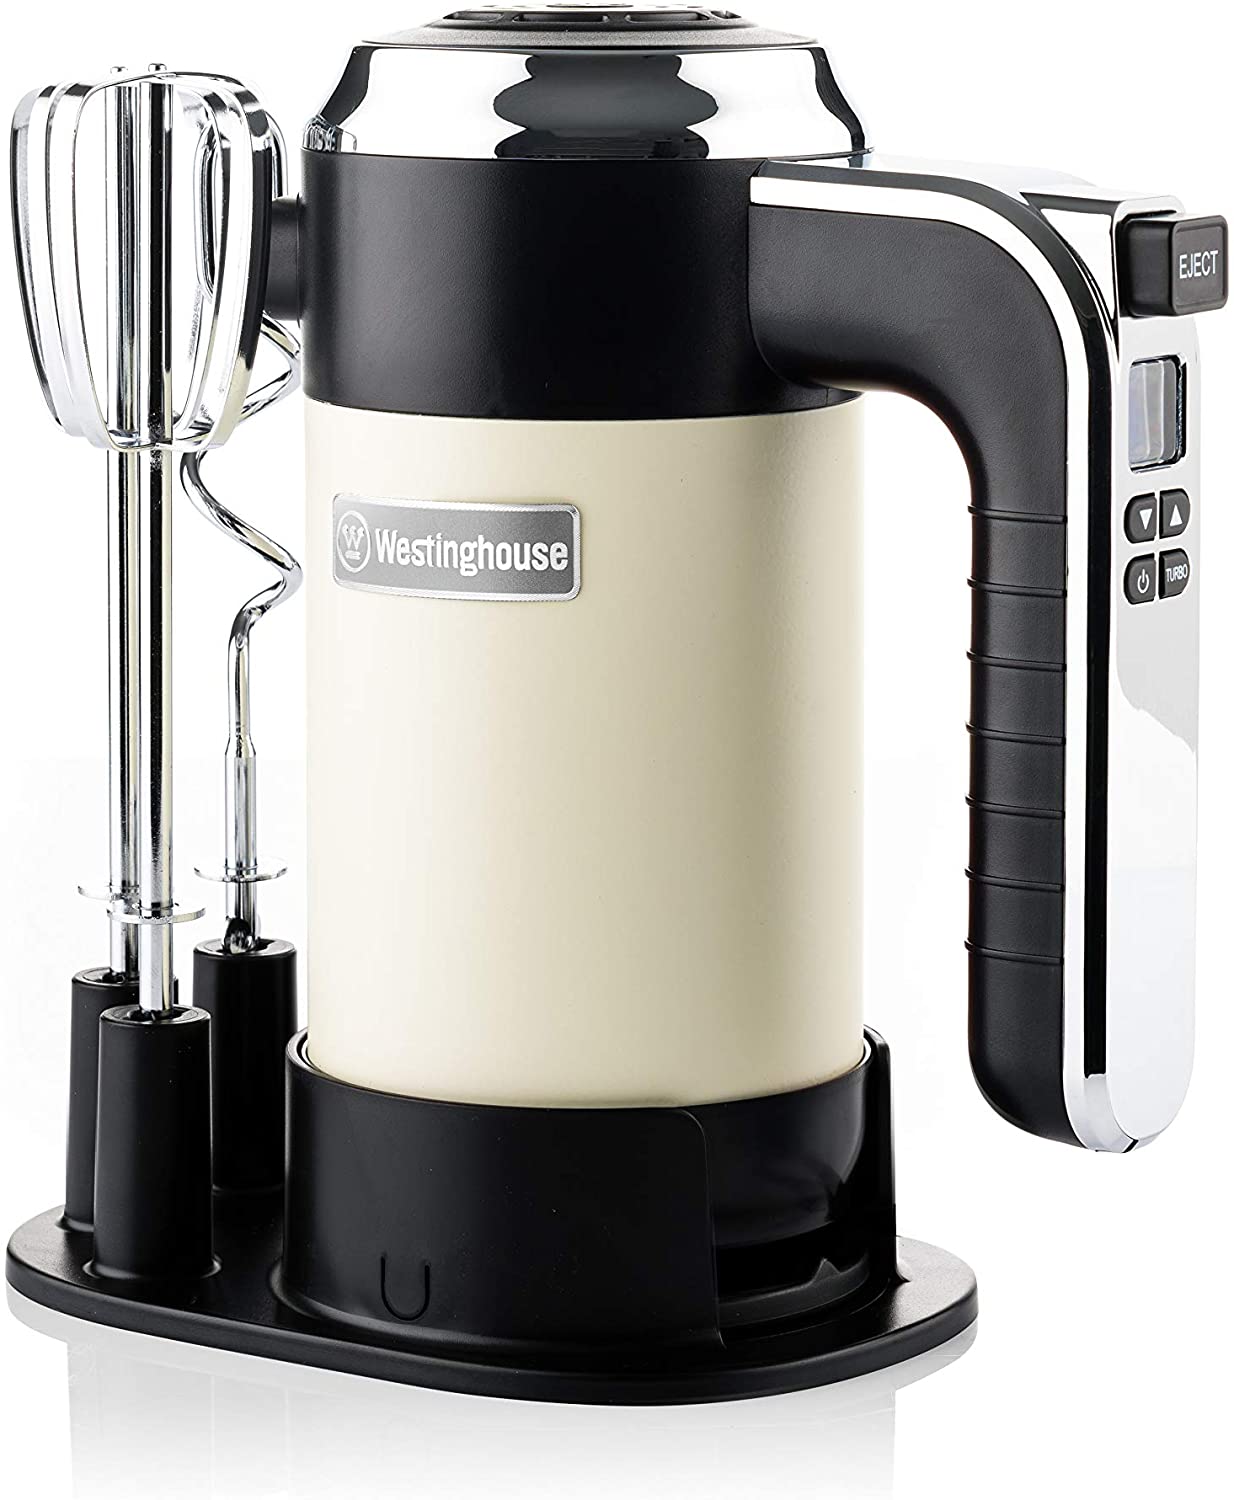 Westinghouse Hand Mixer Retro Hand Mixer with 6 Levels + Turbo Function, Ideal as Kitchen Whisk and Kneading (Set of 2) Mixer with Timer, Colour: White